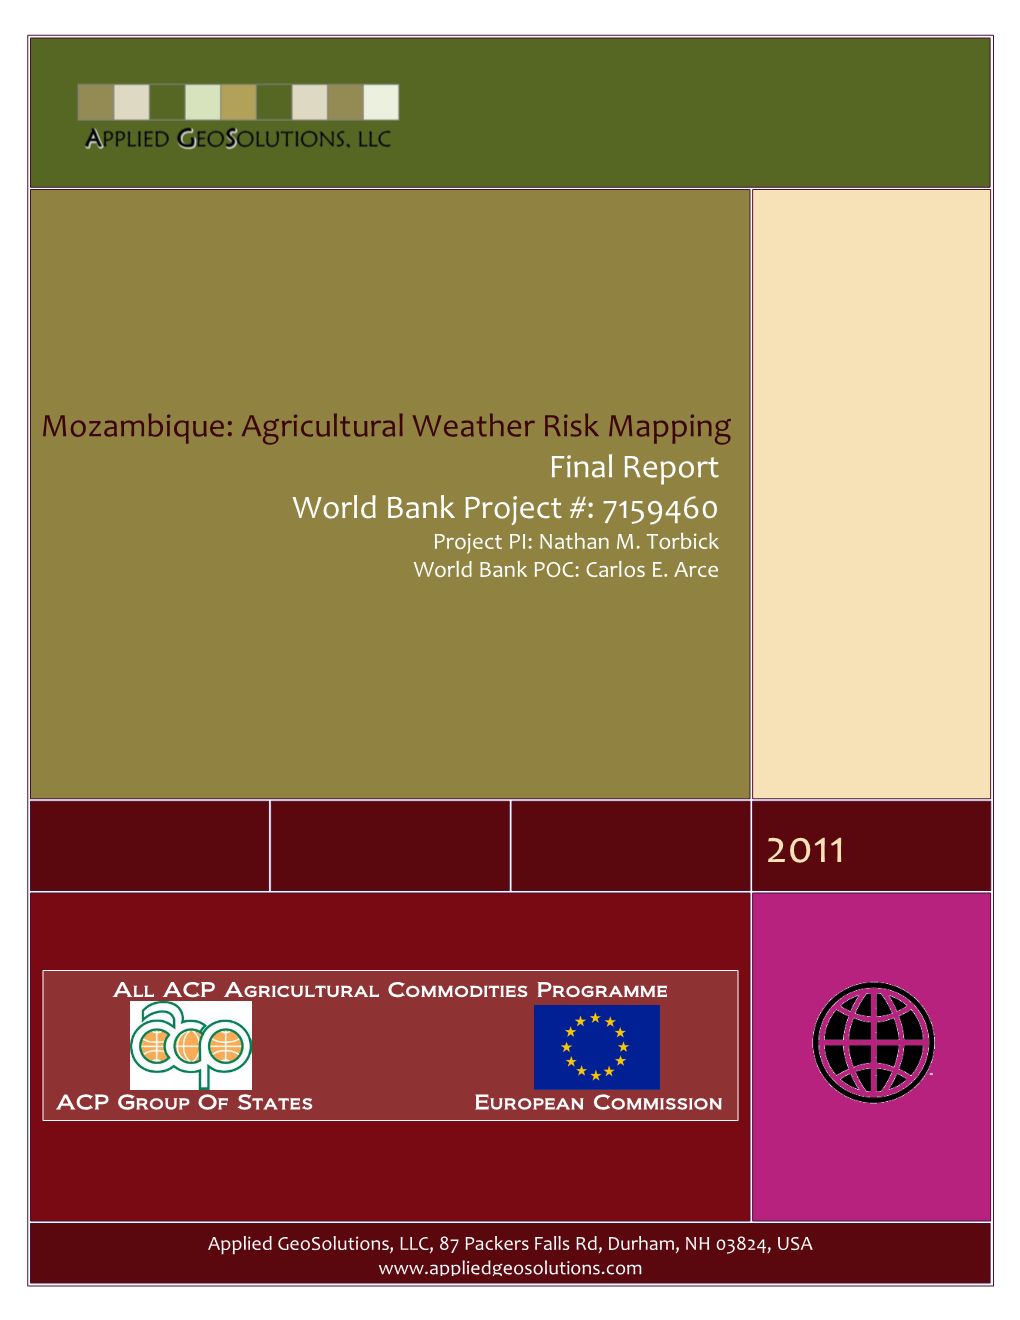 Mozambique: Agricultural Weather Risk Mapping Final Report World Bank Project #: 7159460 Project PI: Nathan M